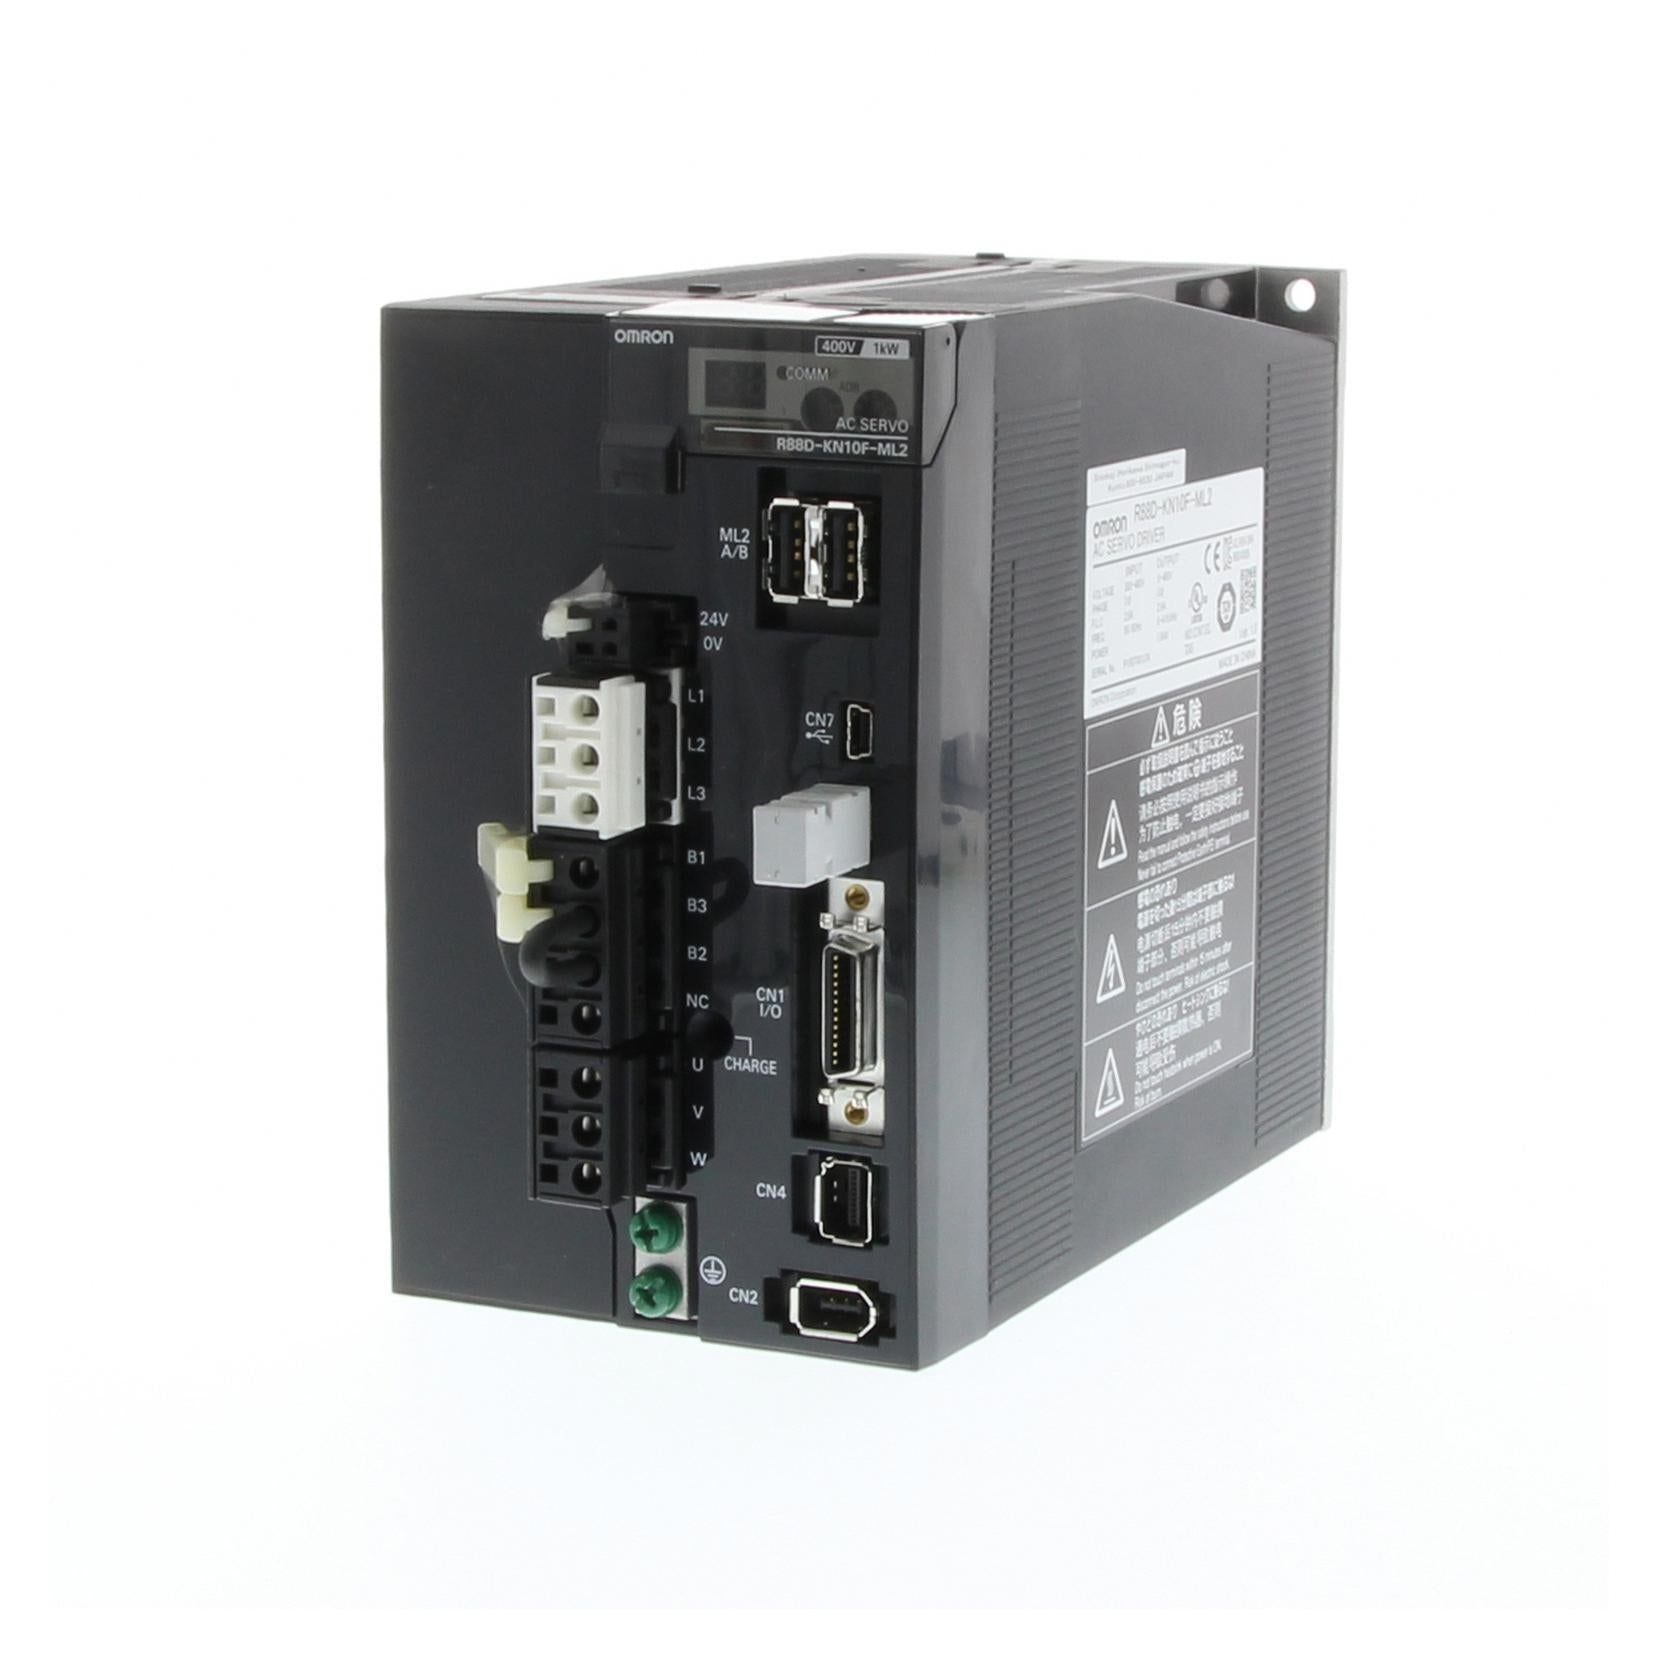 R88D-KN15F-ML2 AC MOTOR SPEED CONTROLLERS OMRON